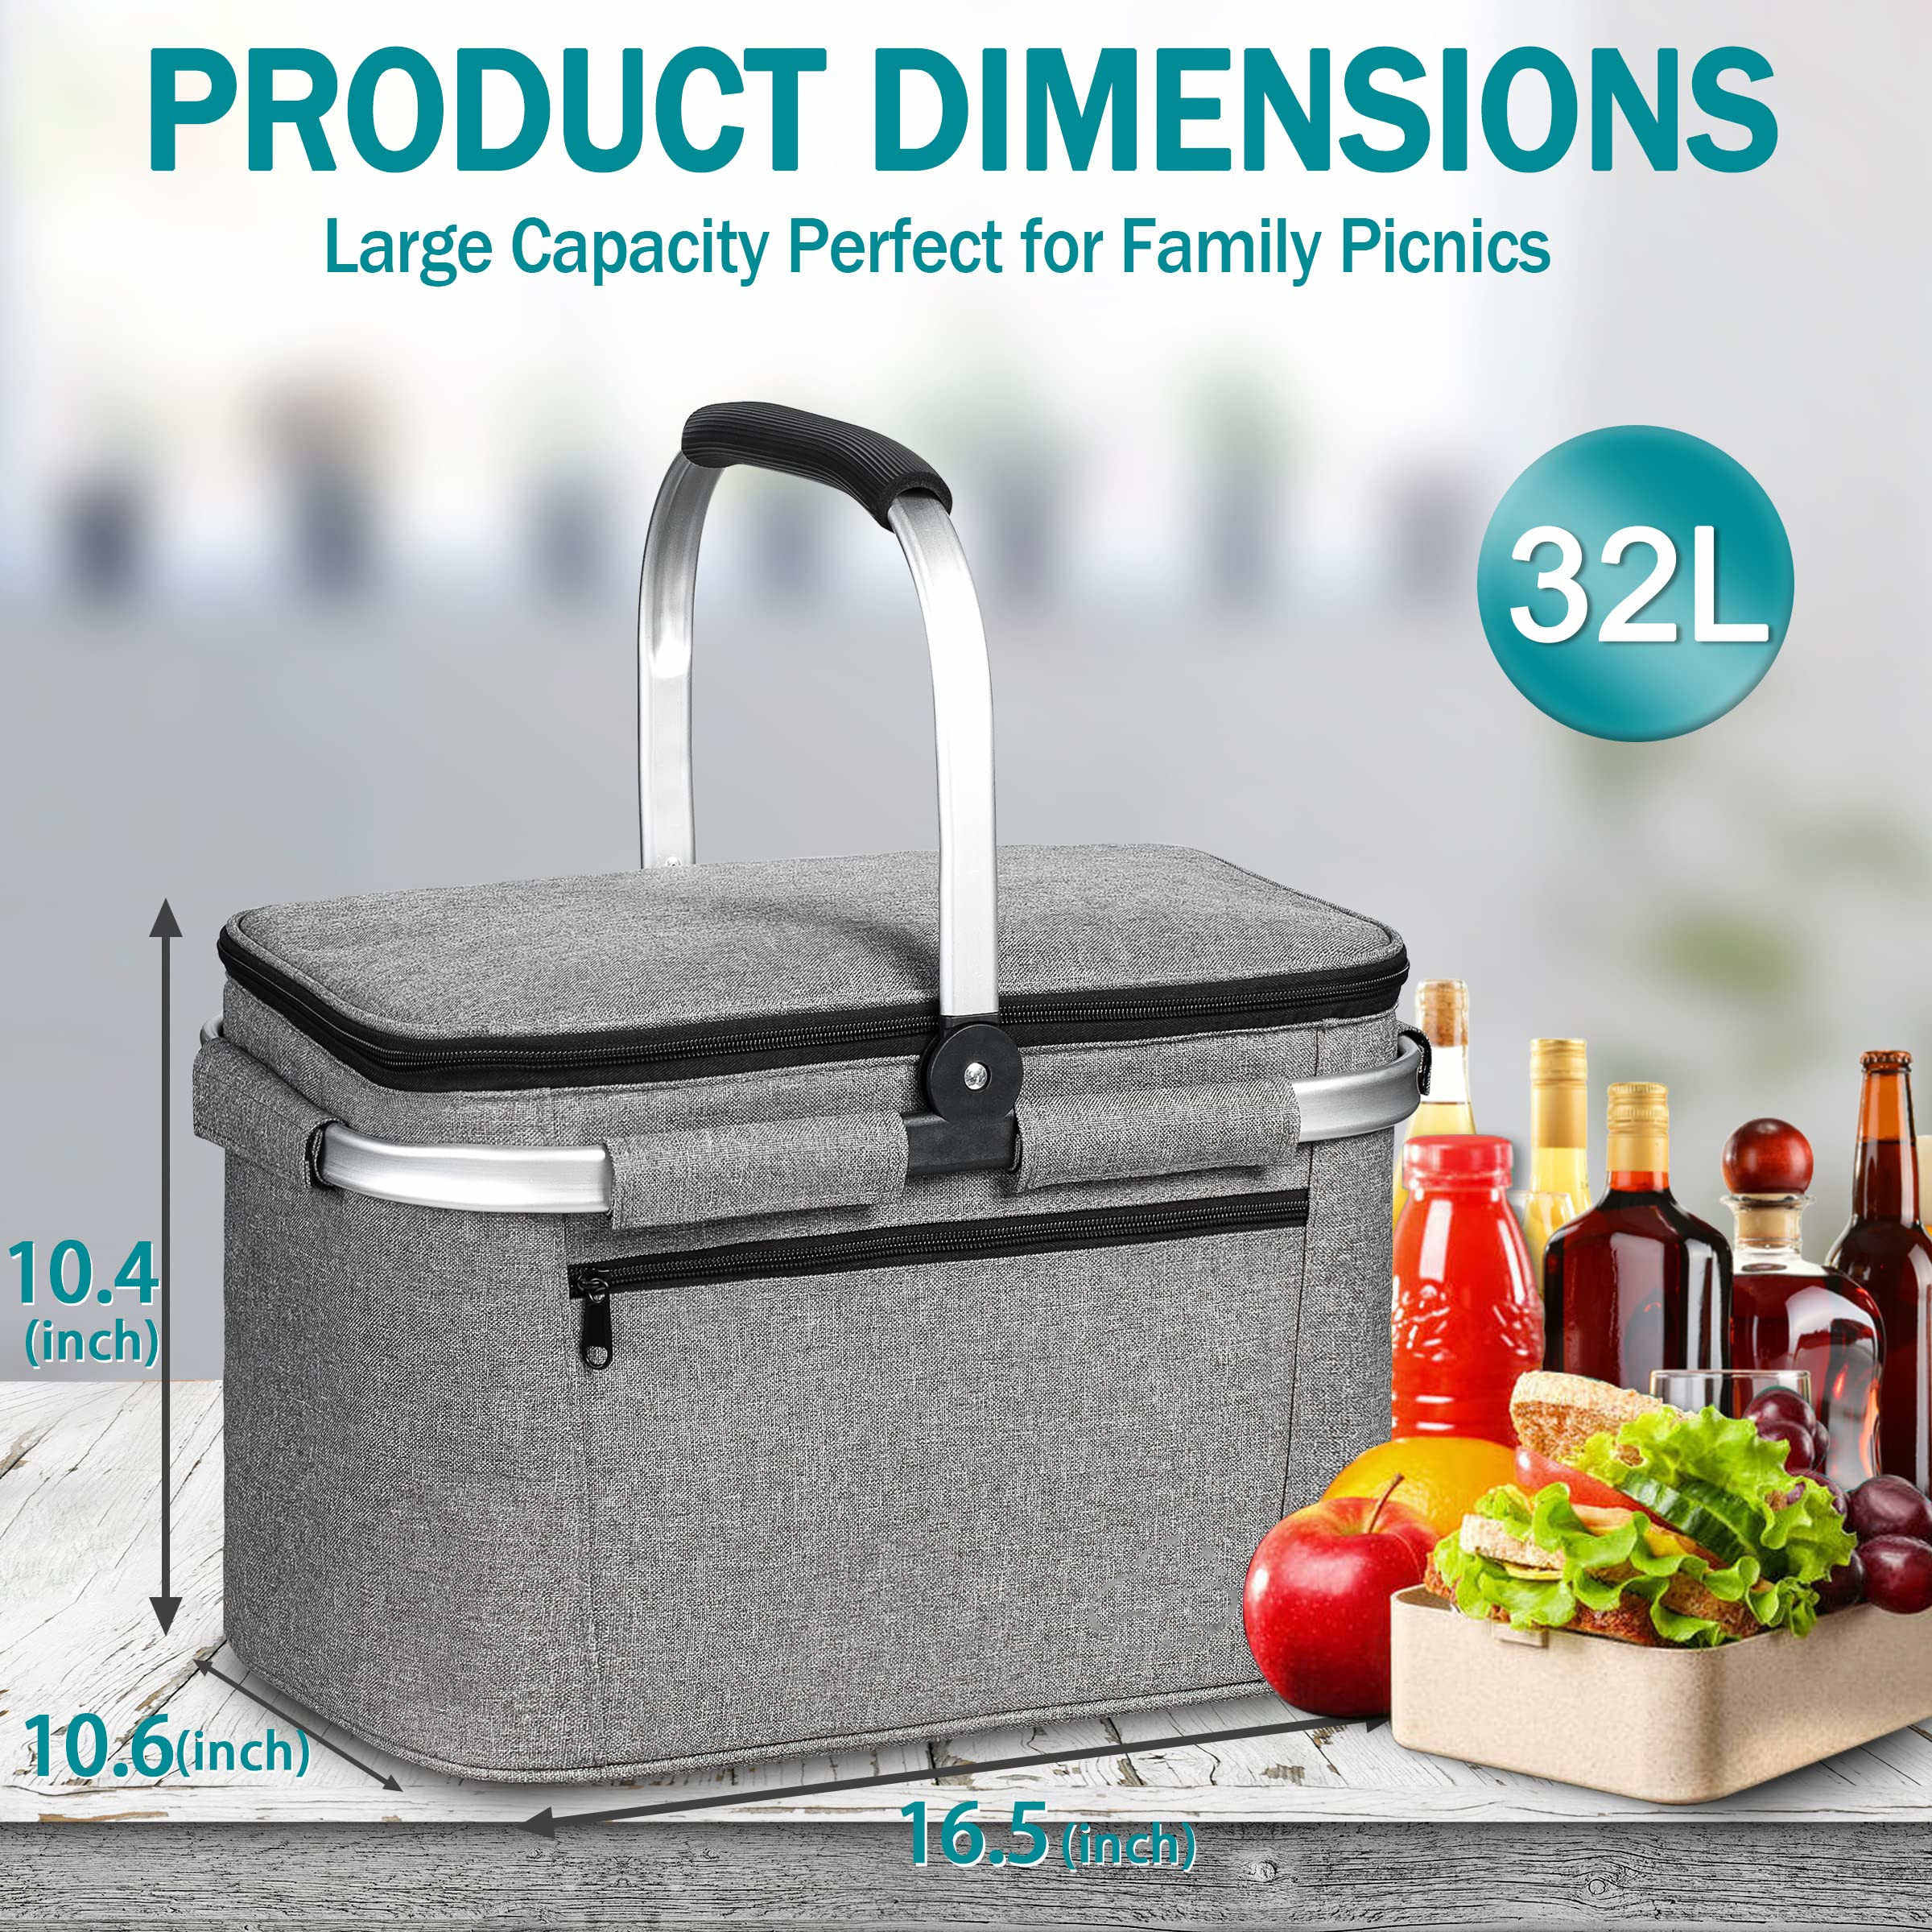 Insulated Picnic Basket 32l Portable Collapsible Wine Beer Can Grocery Bags Leak Proof Cooler Basket For Shopping